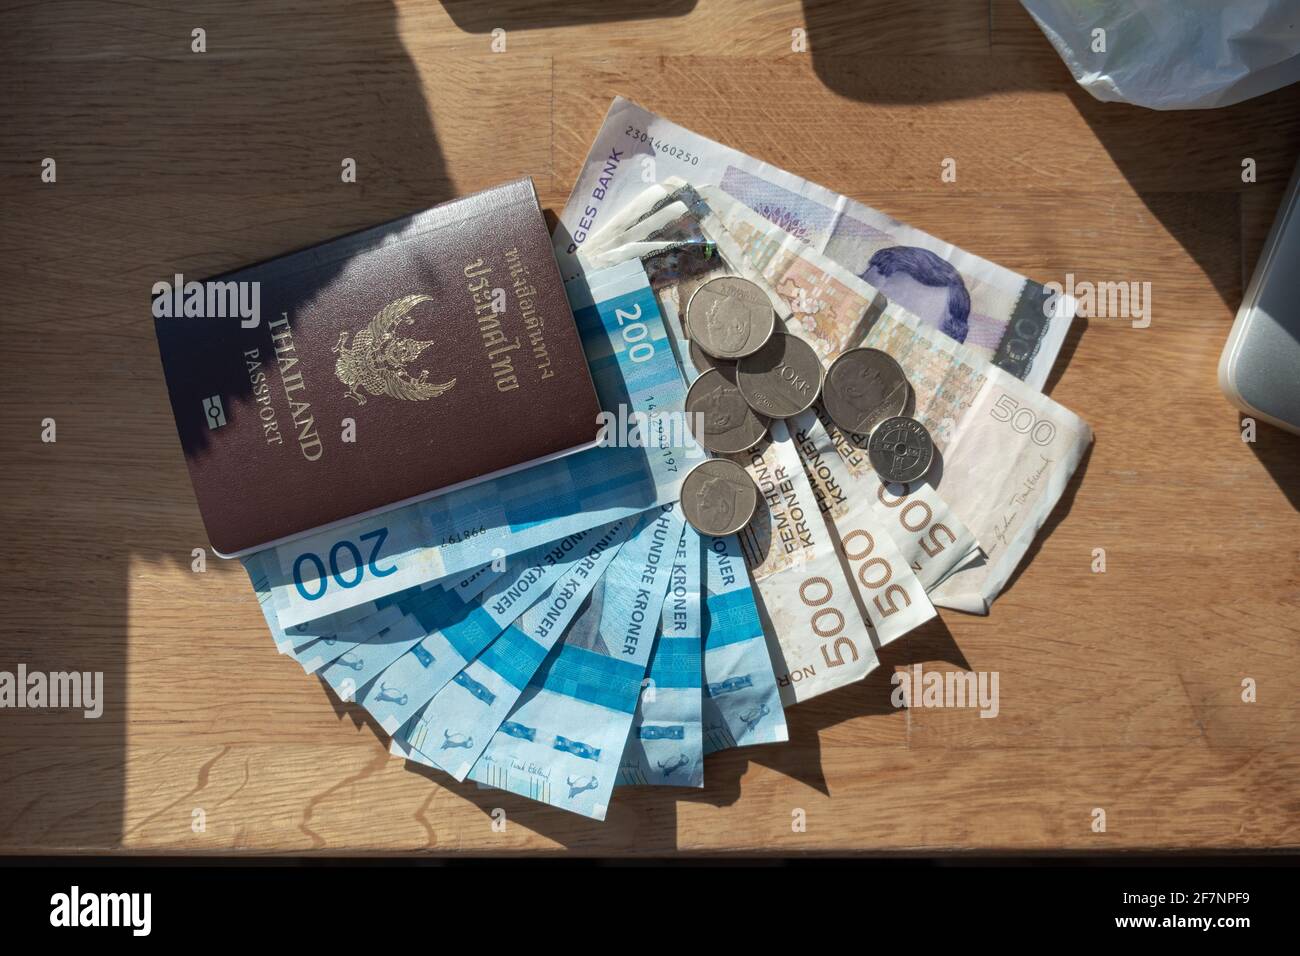 Currency Norway Kroner banknote with Coins and Thailand Passport on wooden  table Stock Photo - Alamy